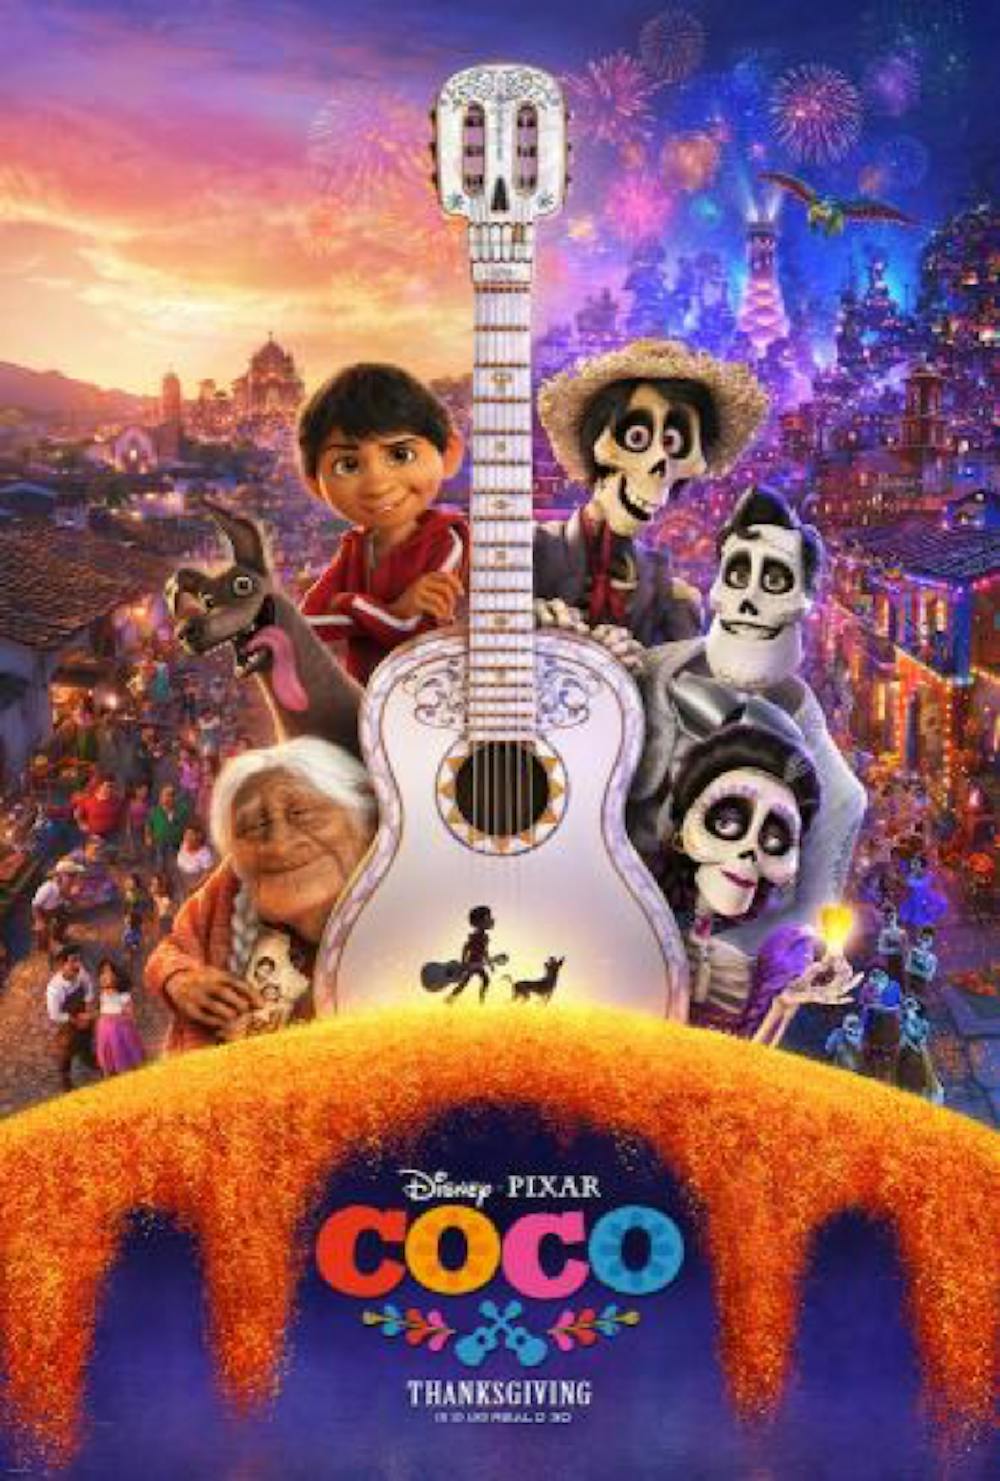 Pixar’s ‘Coco’ is a cultural adventure with many twists and turns, but ultimately finds its way to your heart